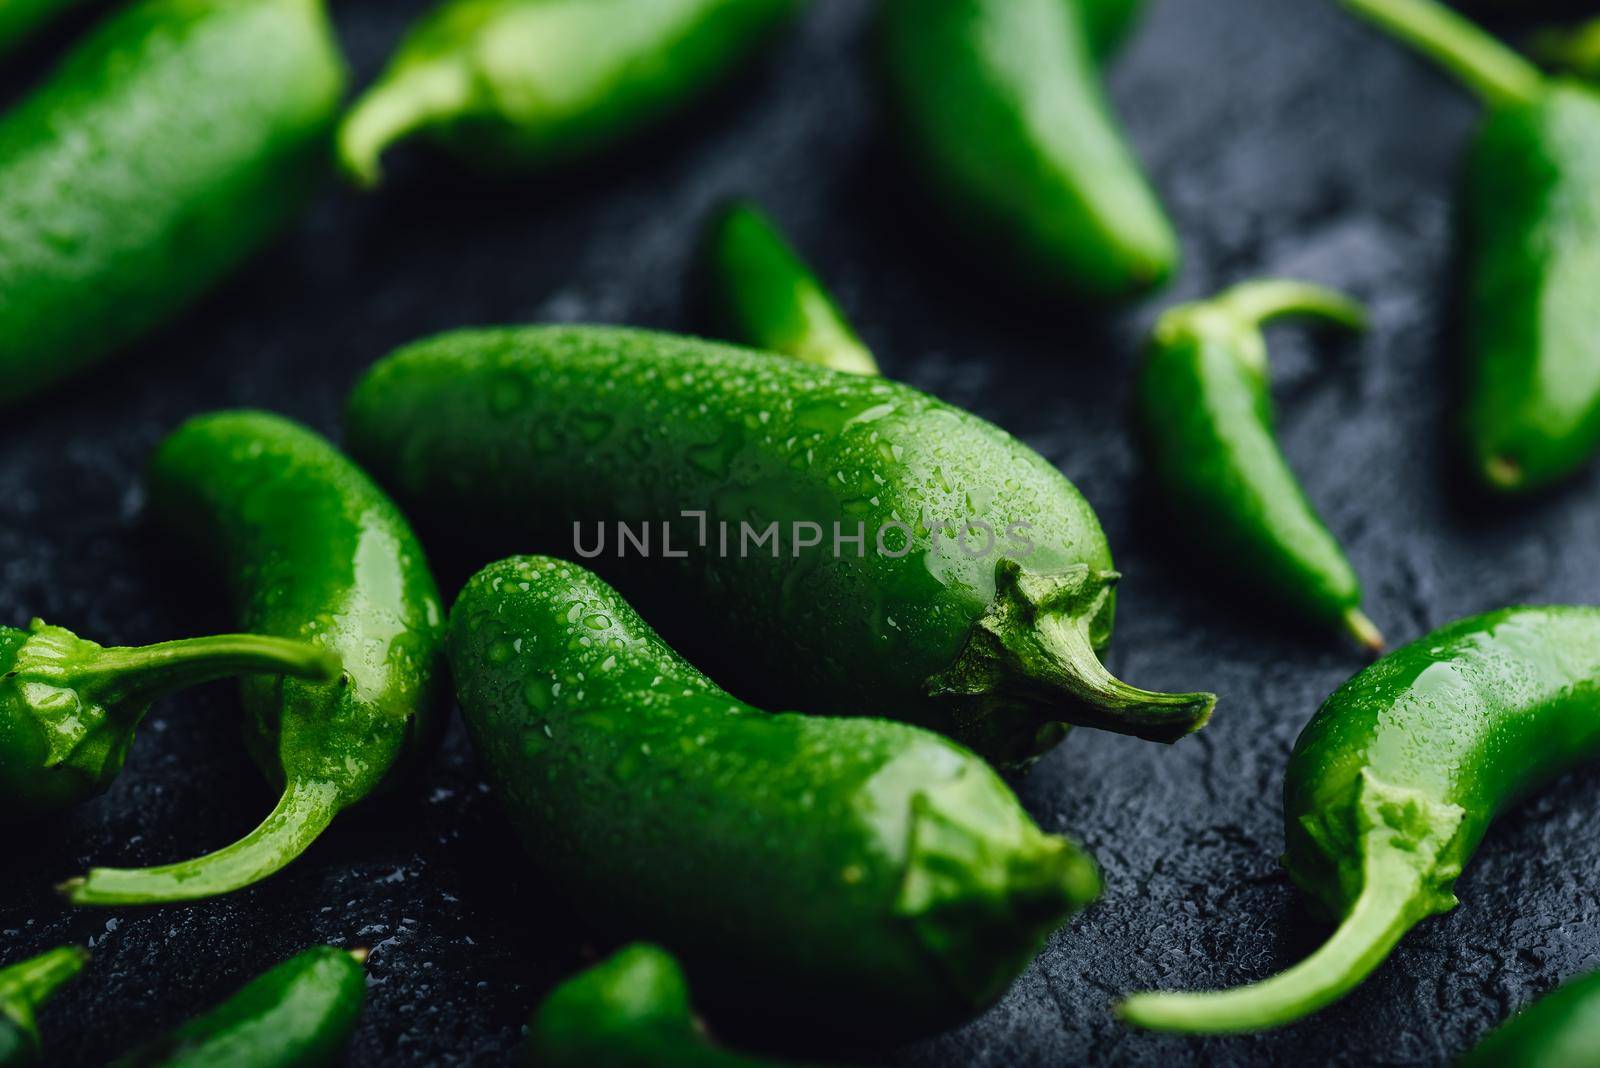 Jalapeno Peppers on Concrete Background by Seva_blsv